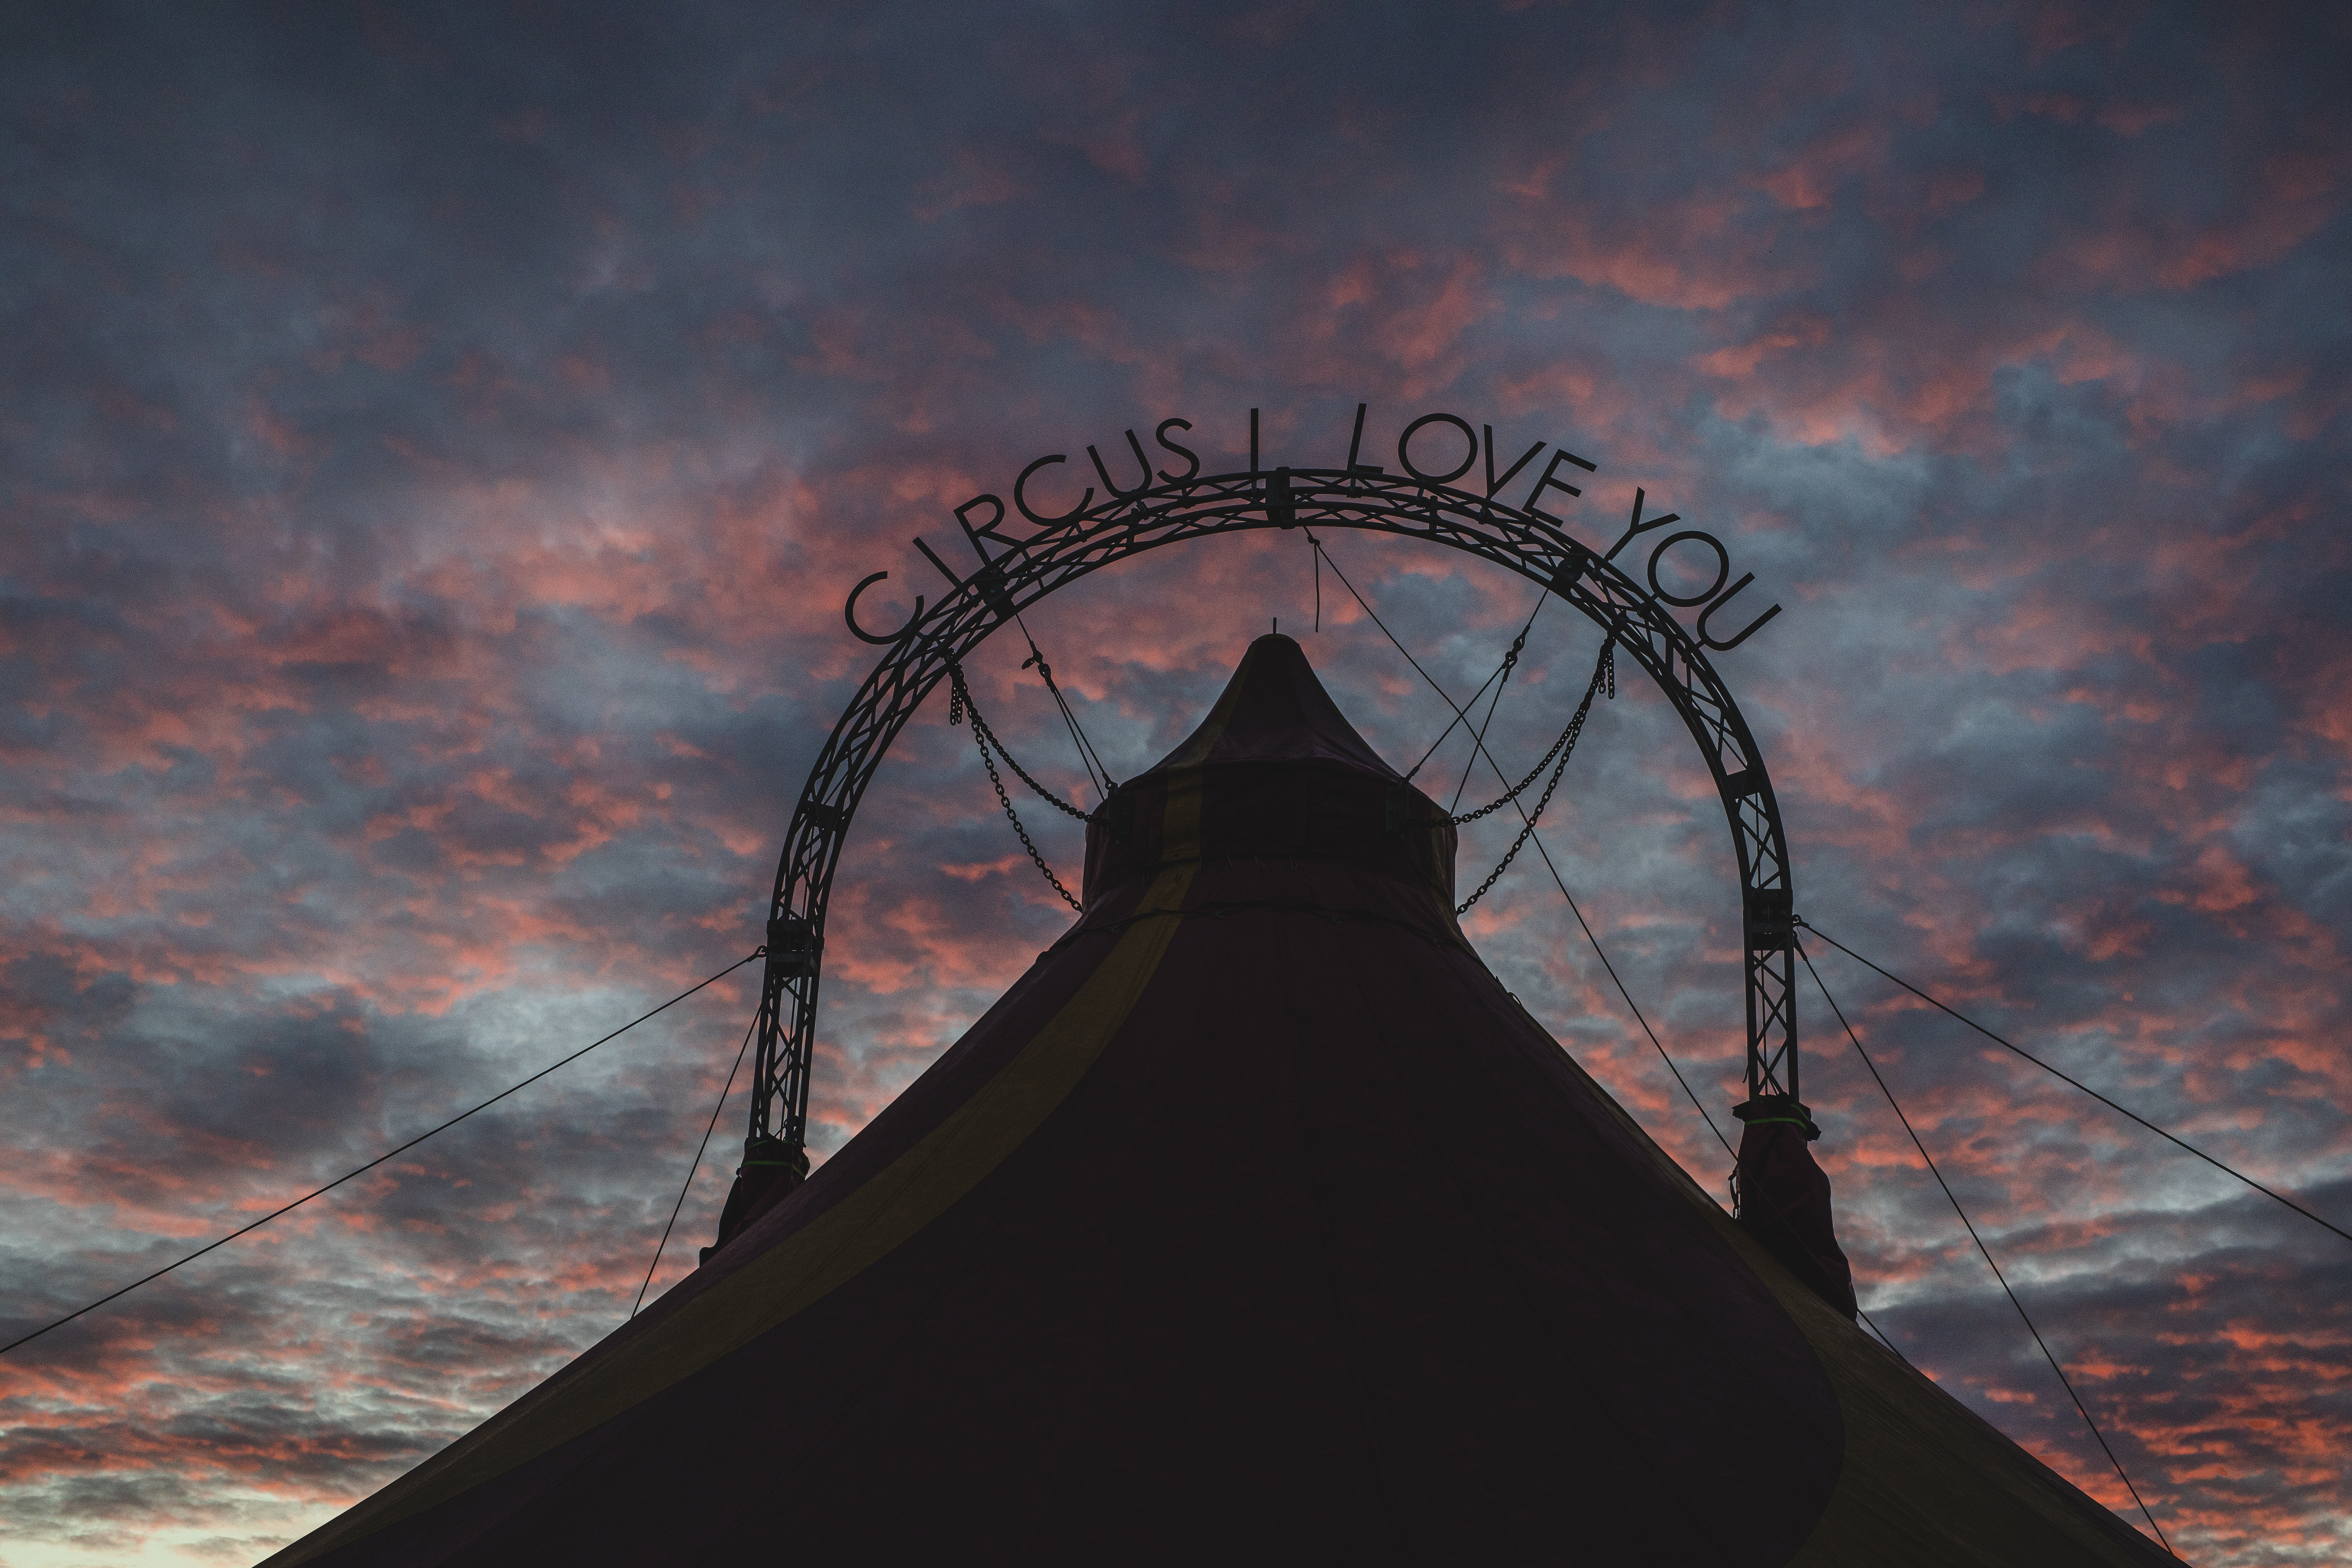 High resolution photo of a circus tent at sunset